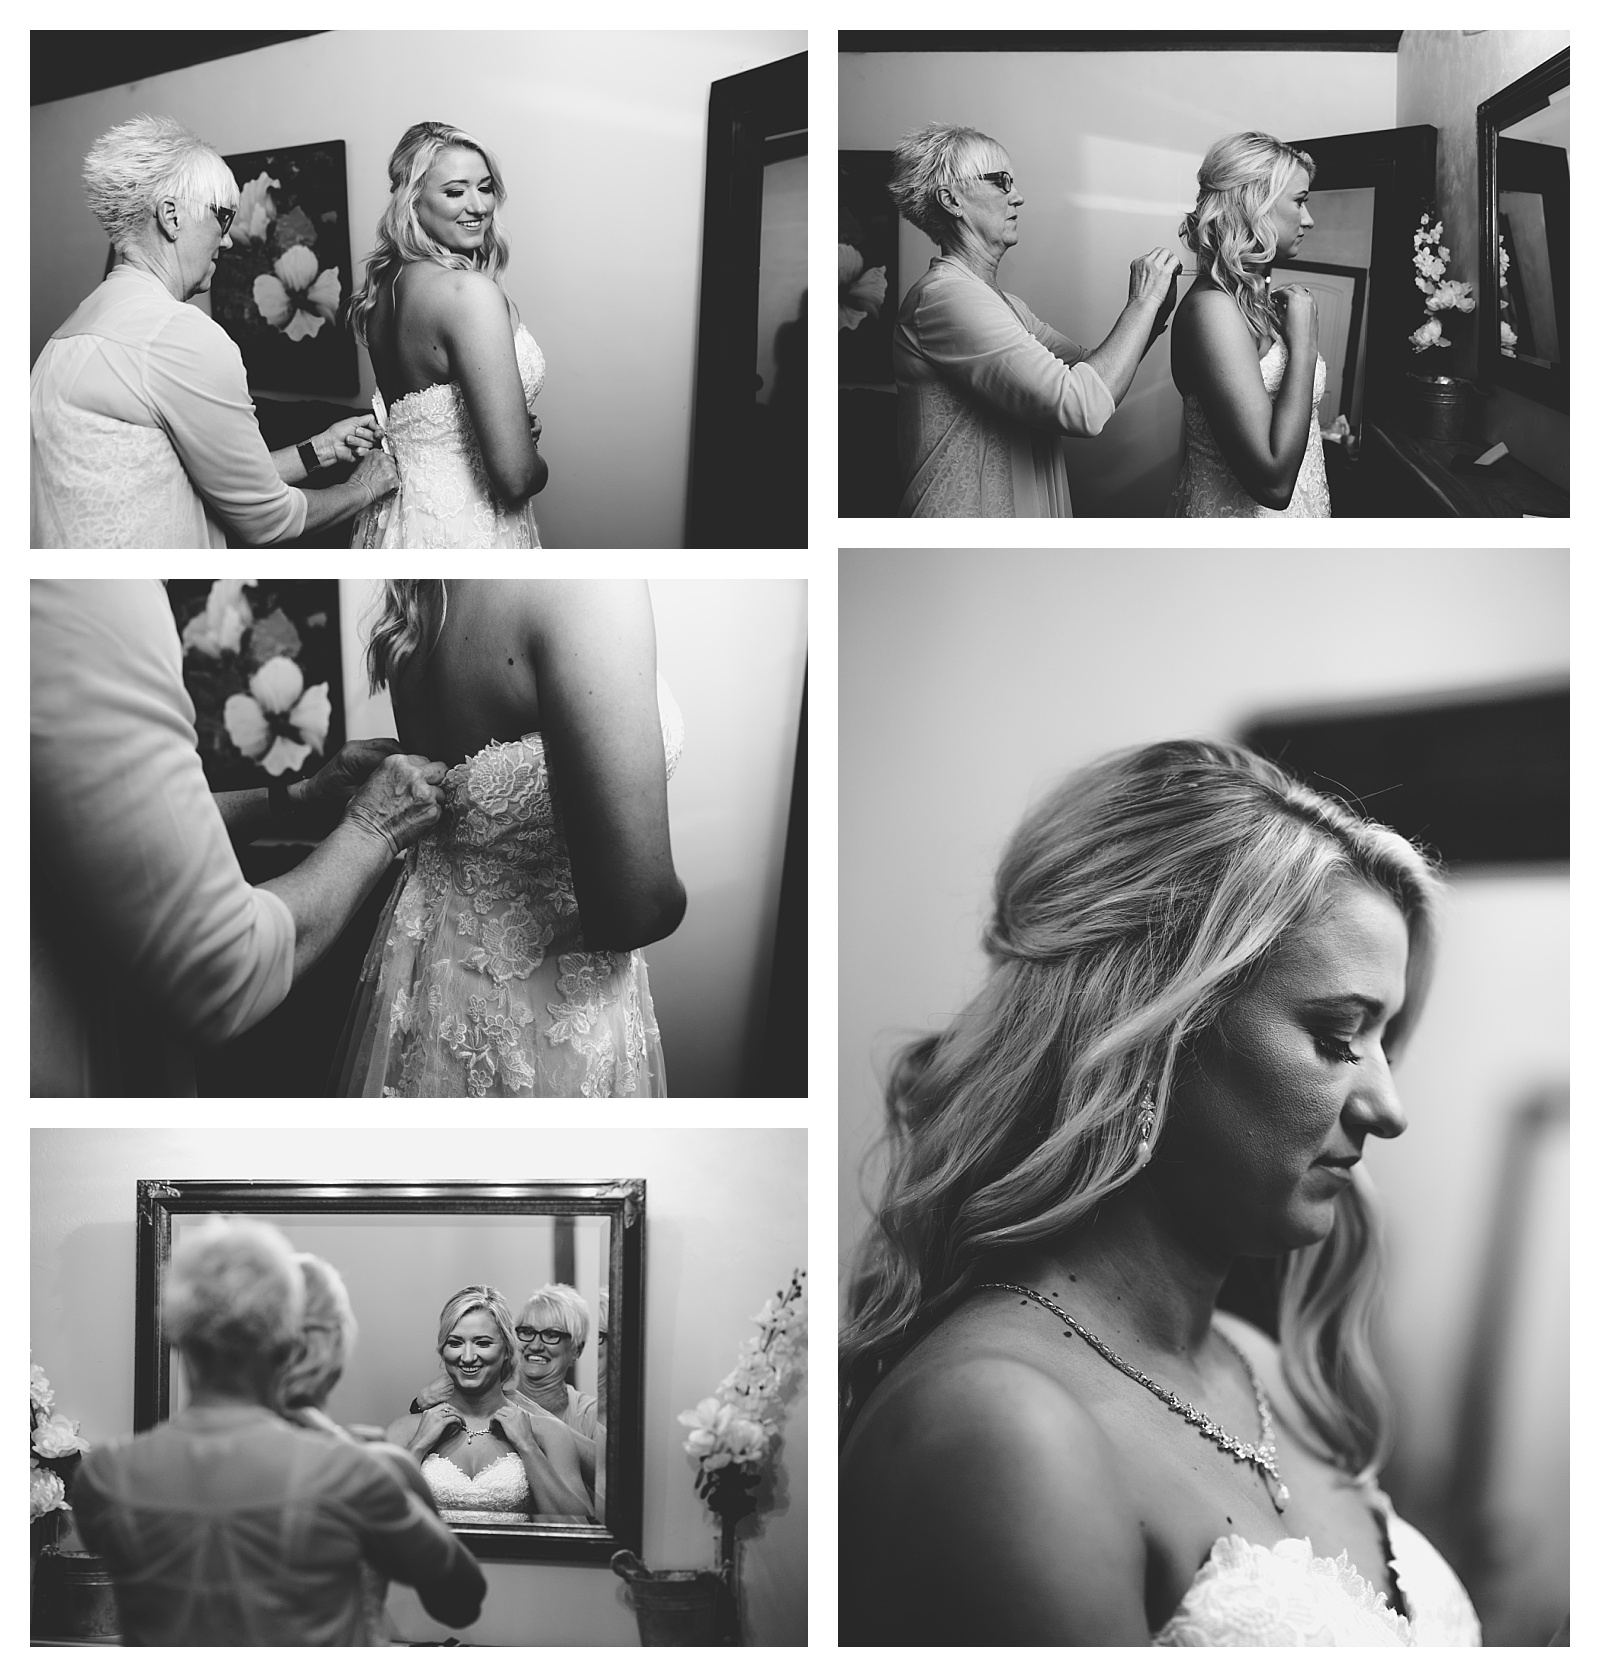 Photographer for getting ready photos on wedding day. Gainesville, FLorida. Shelly Williams Photography